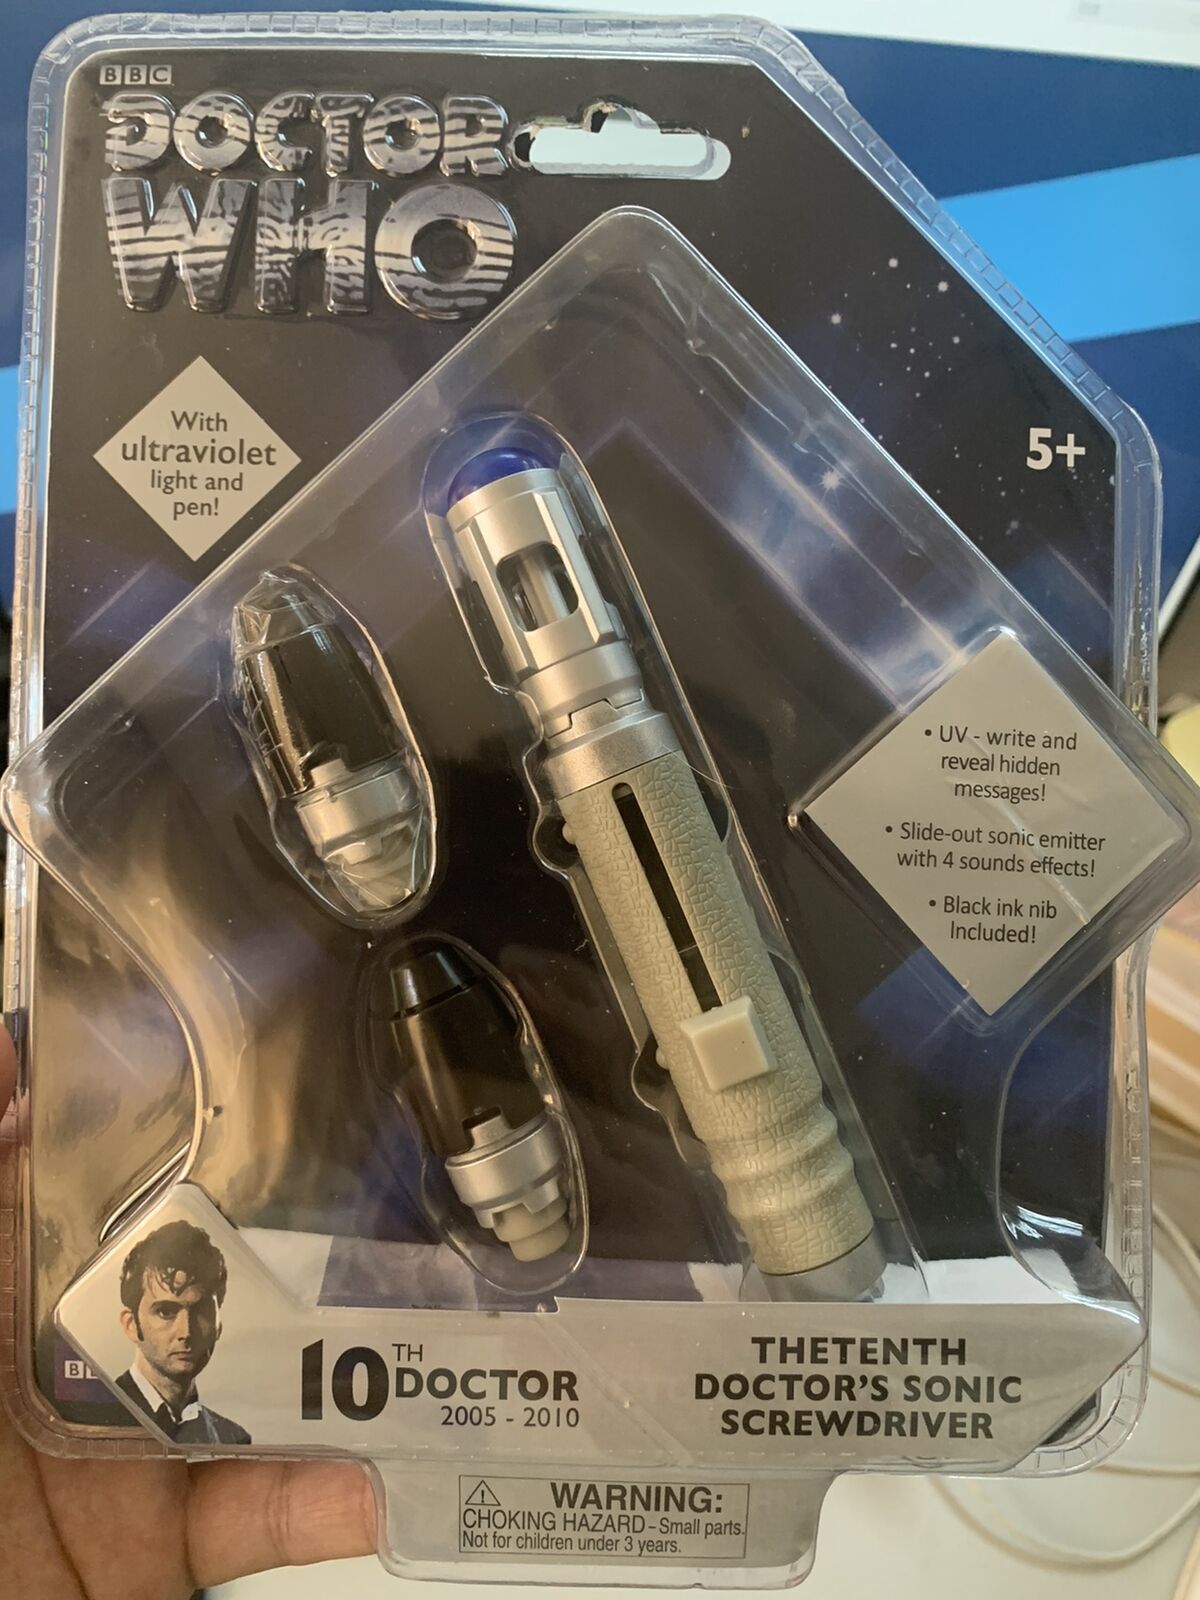 DOCTOR WHO 10th Doctor Sonic Screwdriver Ultraviolet Light & Pen